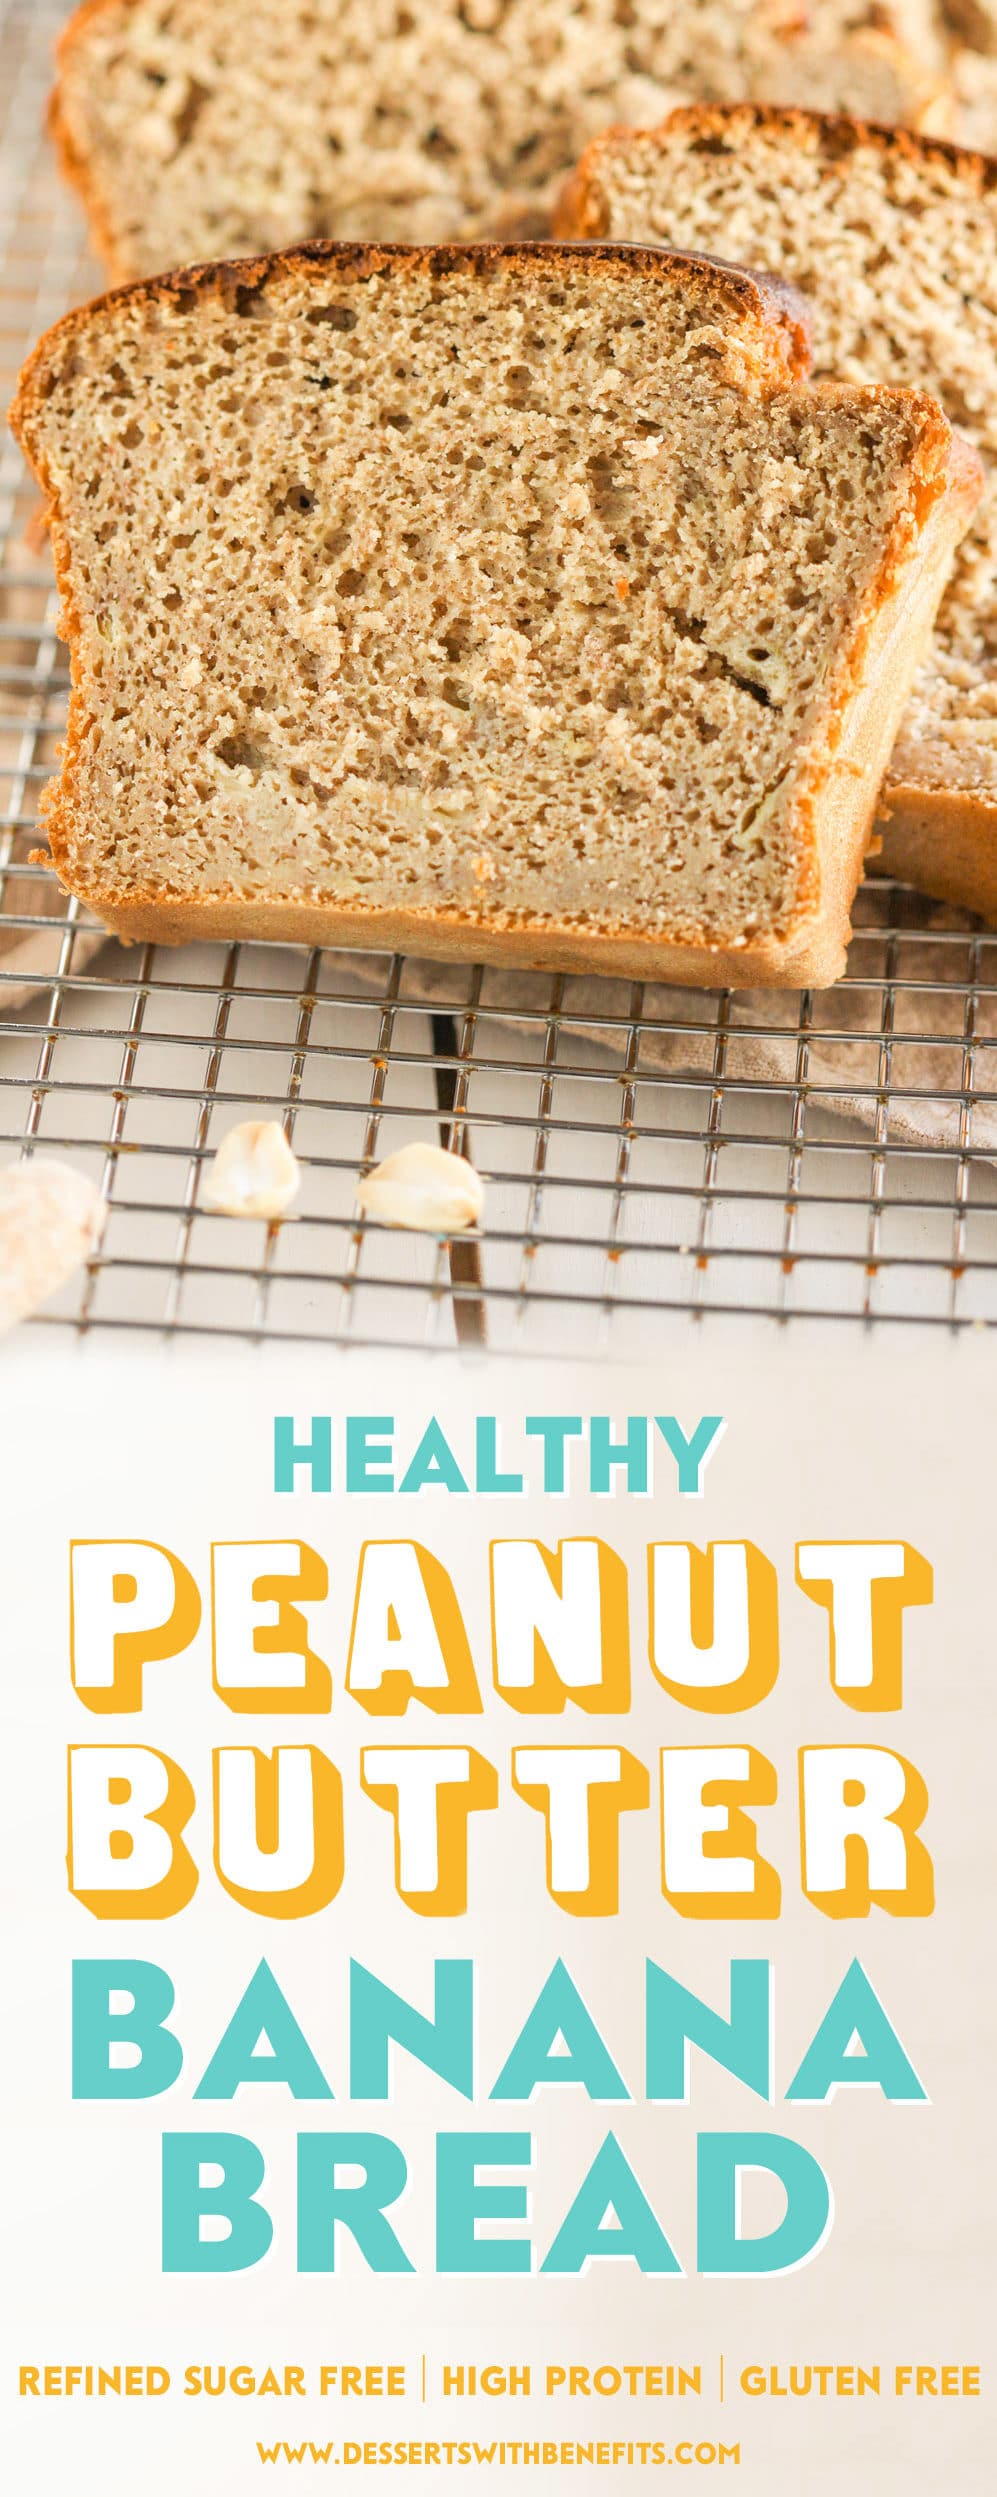 This is the BEST Healthy Peanut Butter Banana Bread EVER! It’s so rich, moist, and flavorful, one bite and you'll wonder how there’s no butter and no sugar added. Yes, this bread is refined sugar free, gluten free, AND high protein! Healthy Dessert Recipes with low calorie, low fat, low carb, gluten free, dairy free, vegan, and raw options at the Desserts With Benefits Blog (www.DessertsWithBenefits.com)